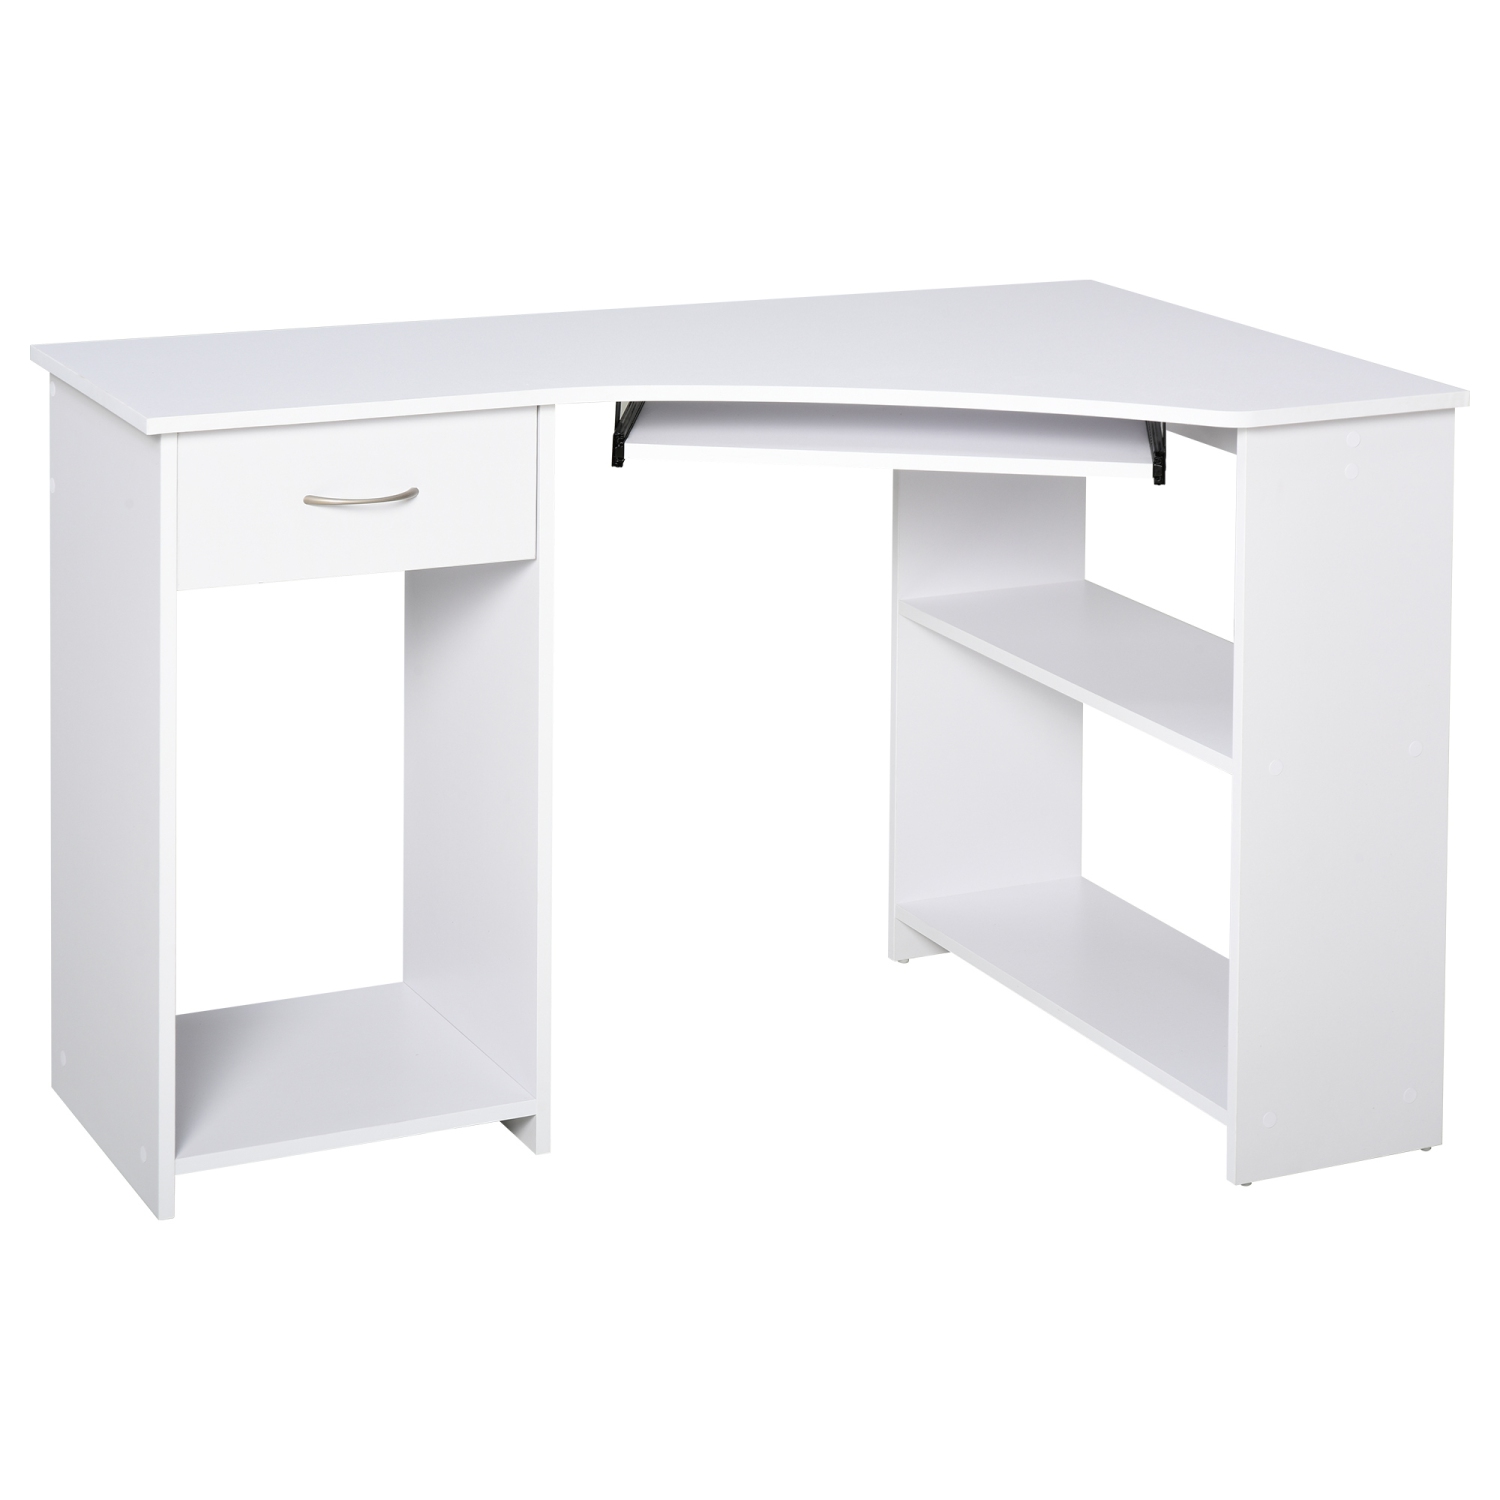 HOMCOM L-Shaped Desk with Keyboard Tray, Computer Corner Desk for Small Space with Shelves, Drawer, CPU Stand, Home Office Writing Table, White